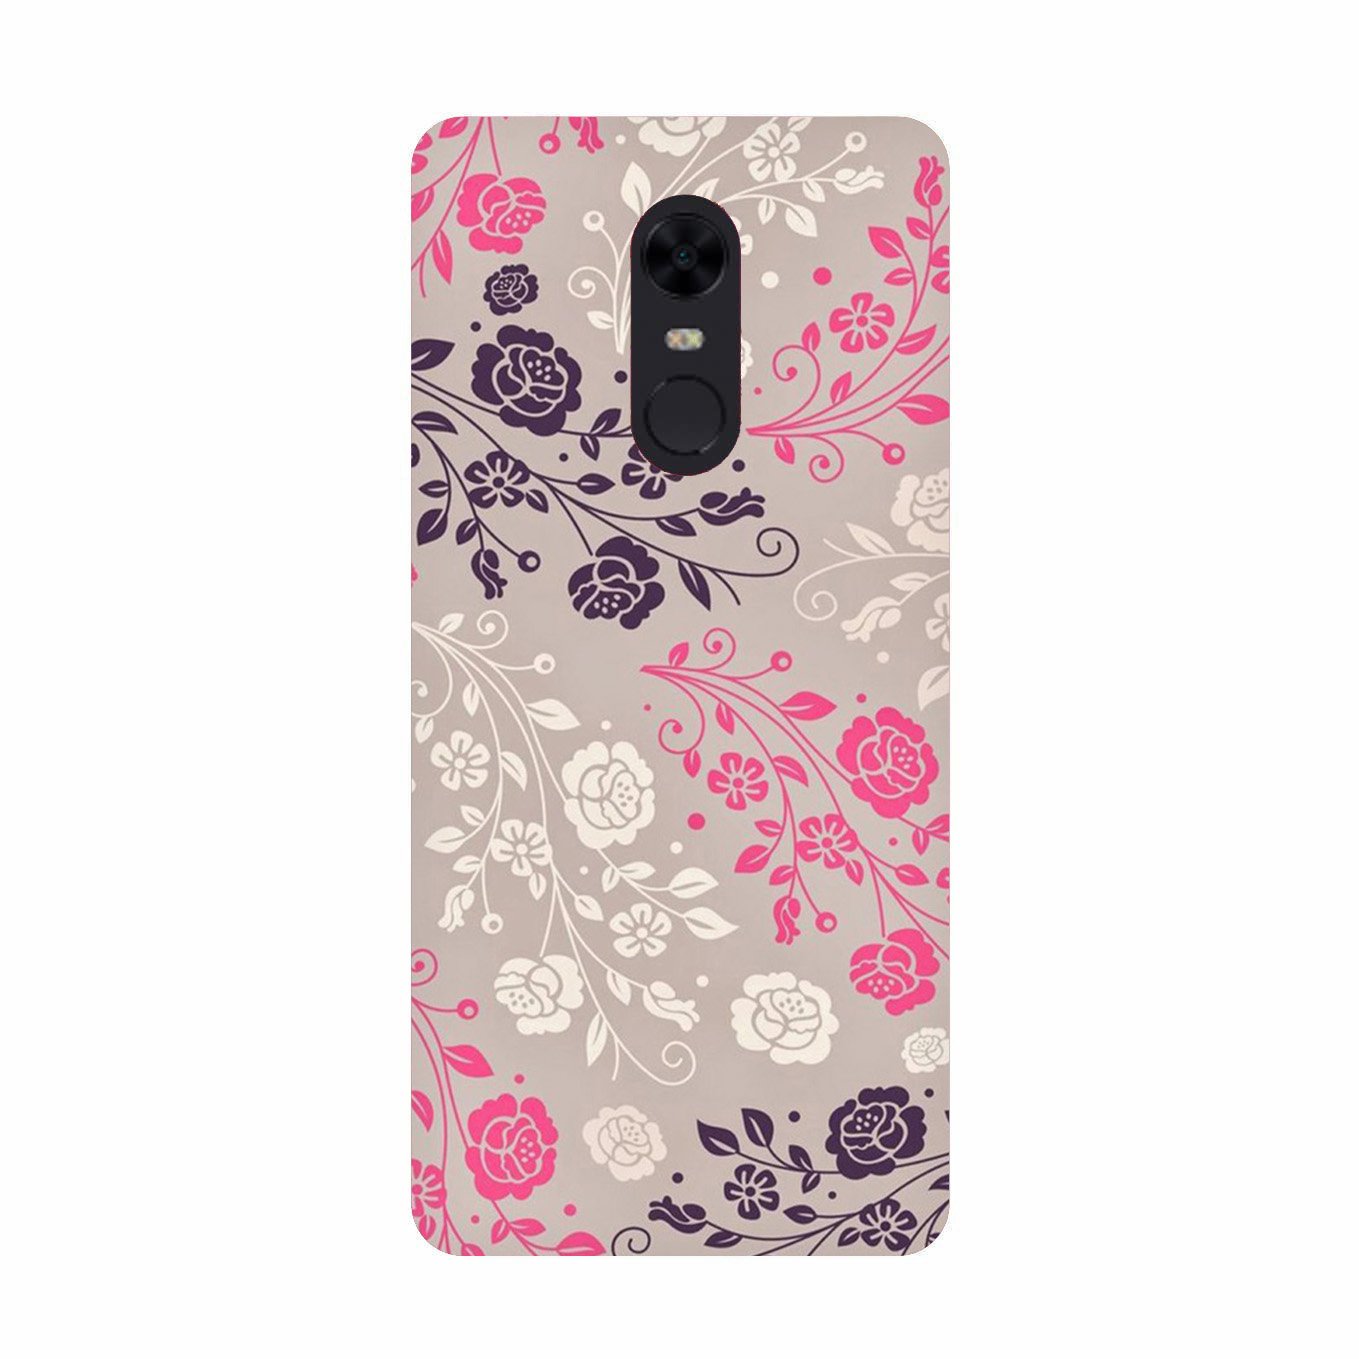 Pattern2 Case for Redmi Note 4